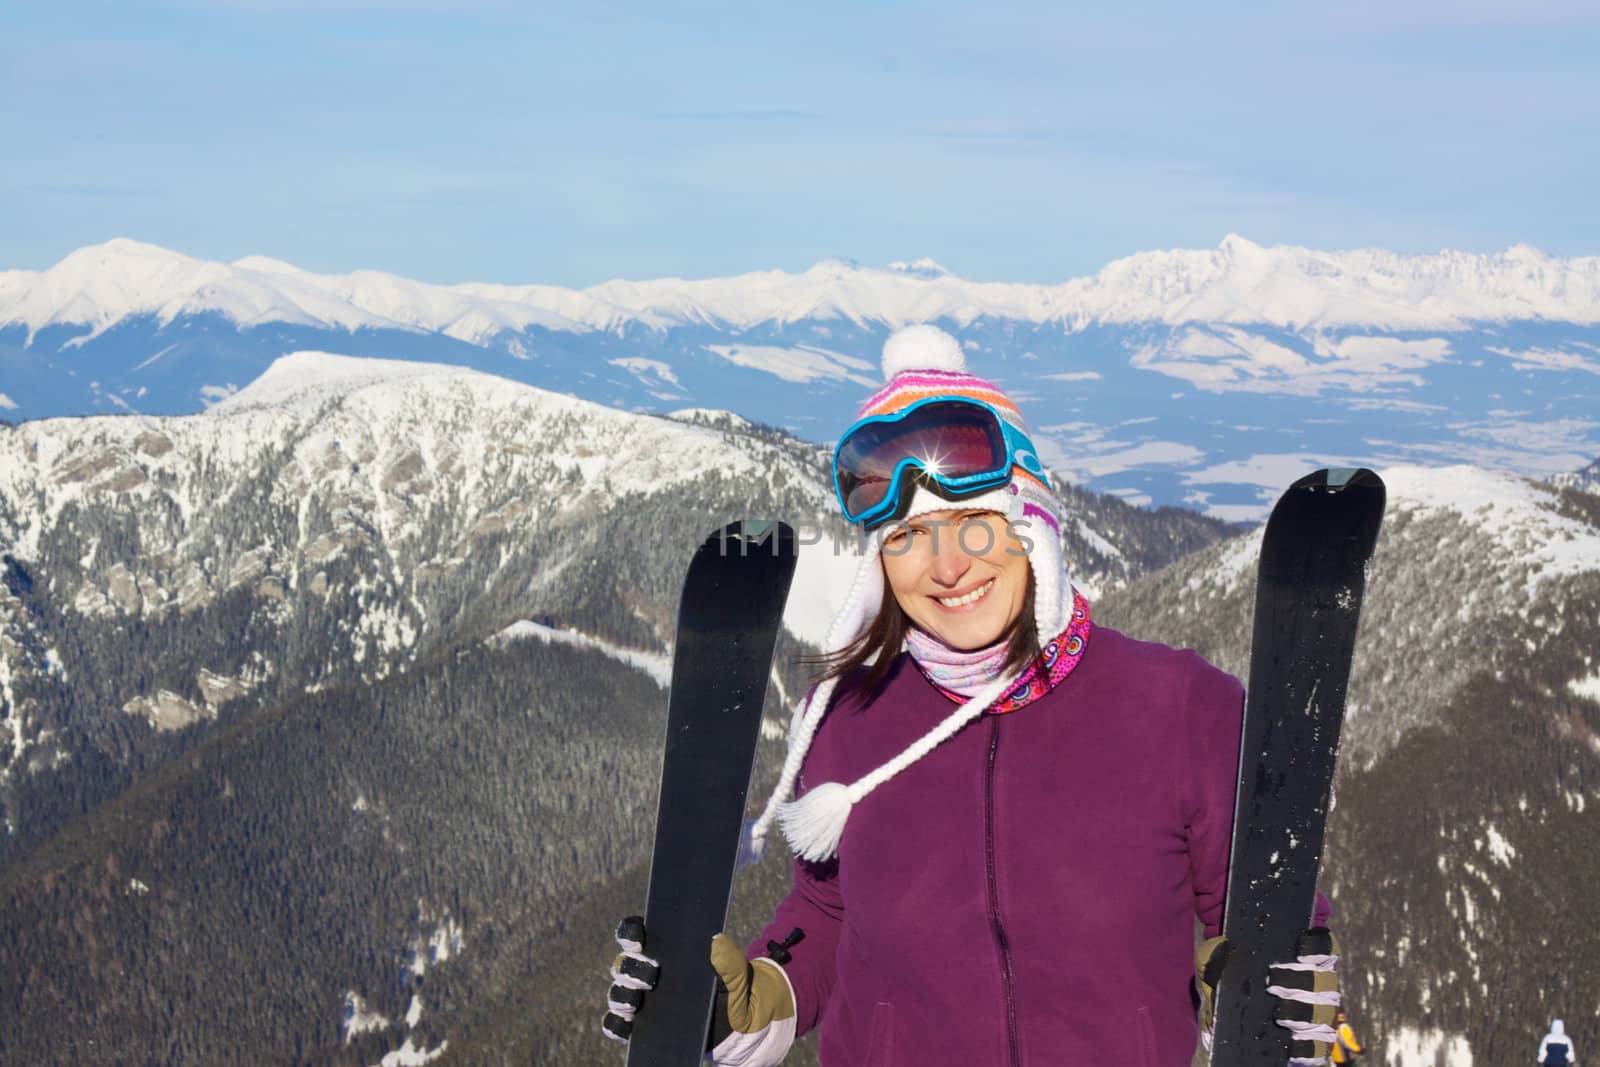 Pretty girl in mountains skiing by Harvepino